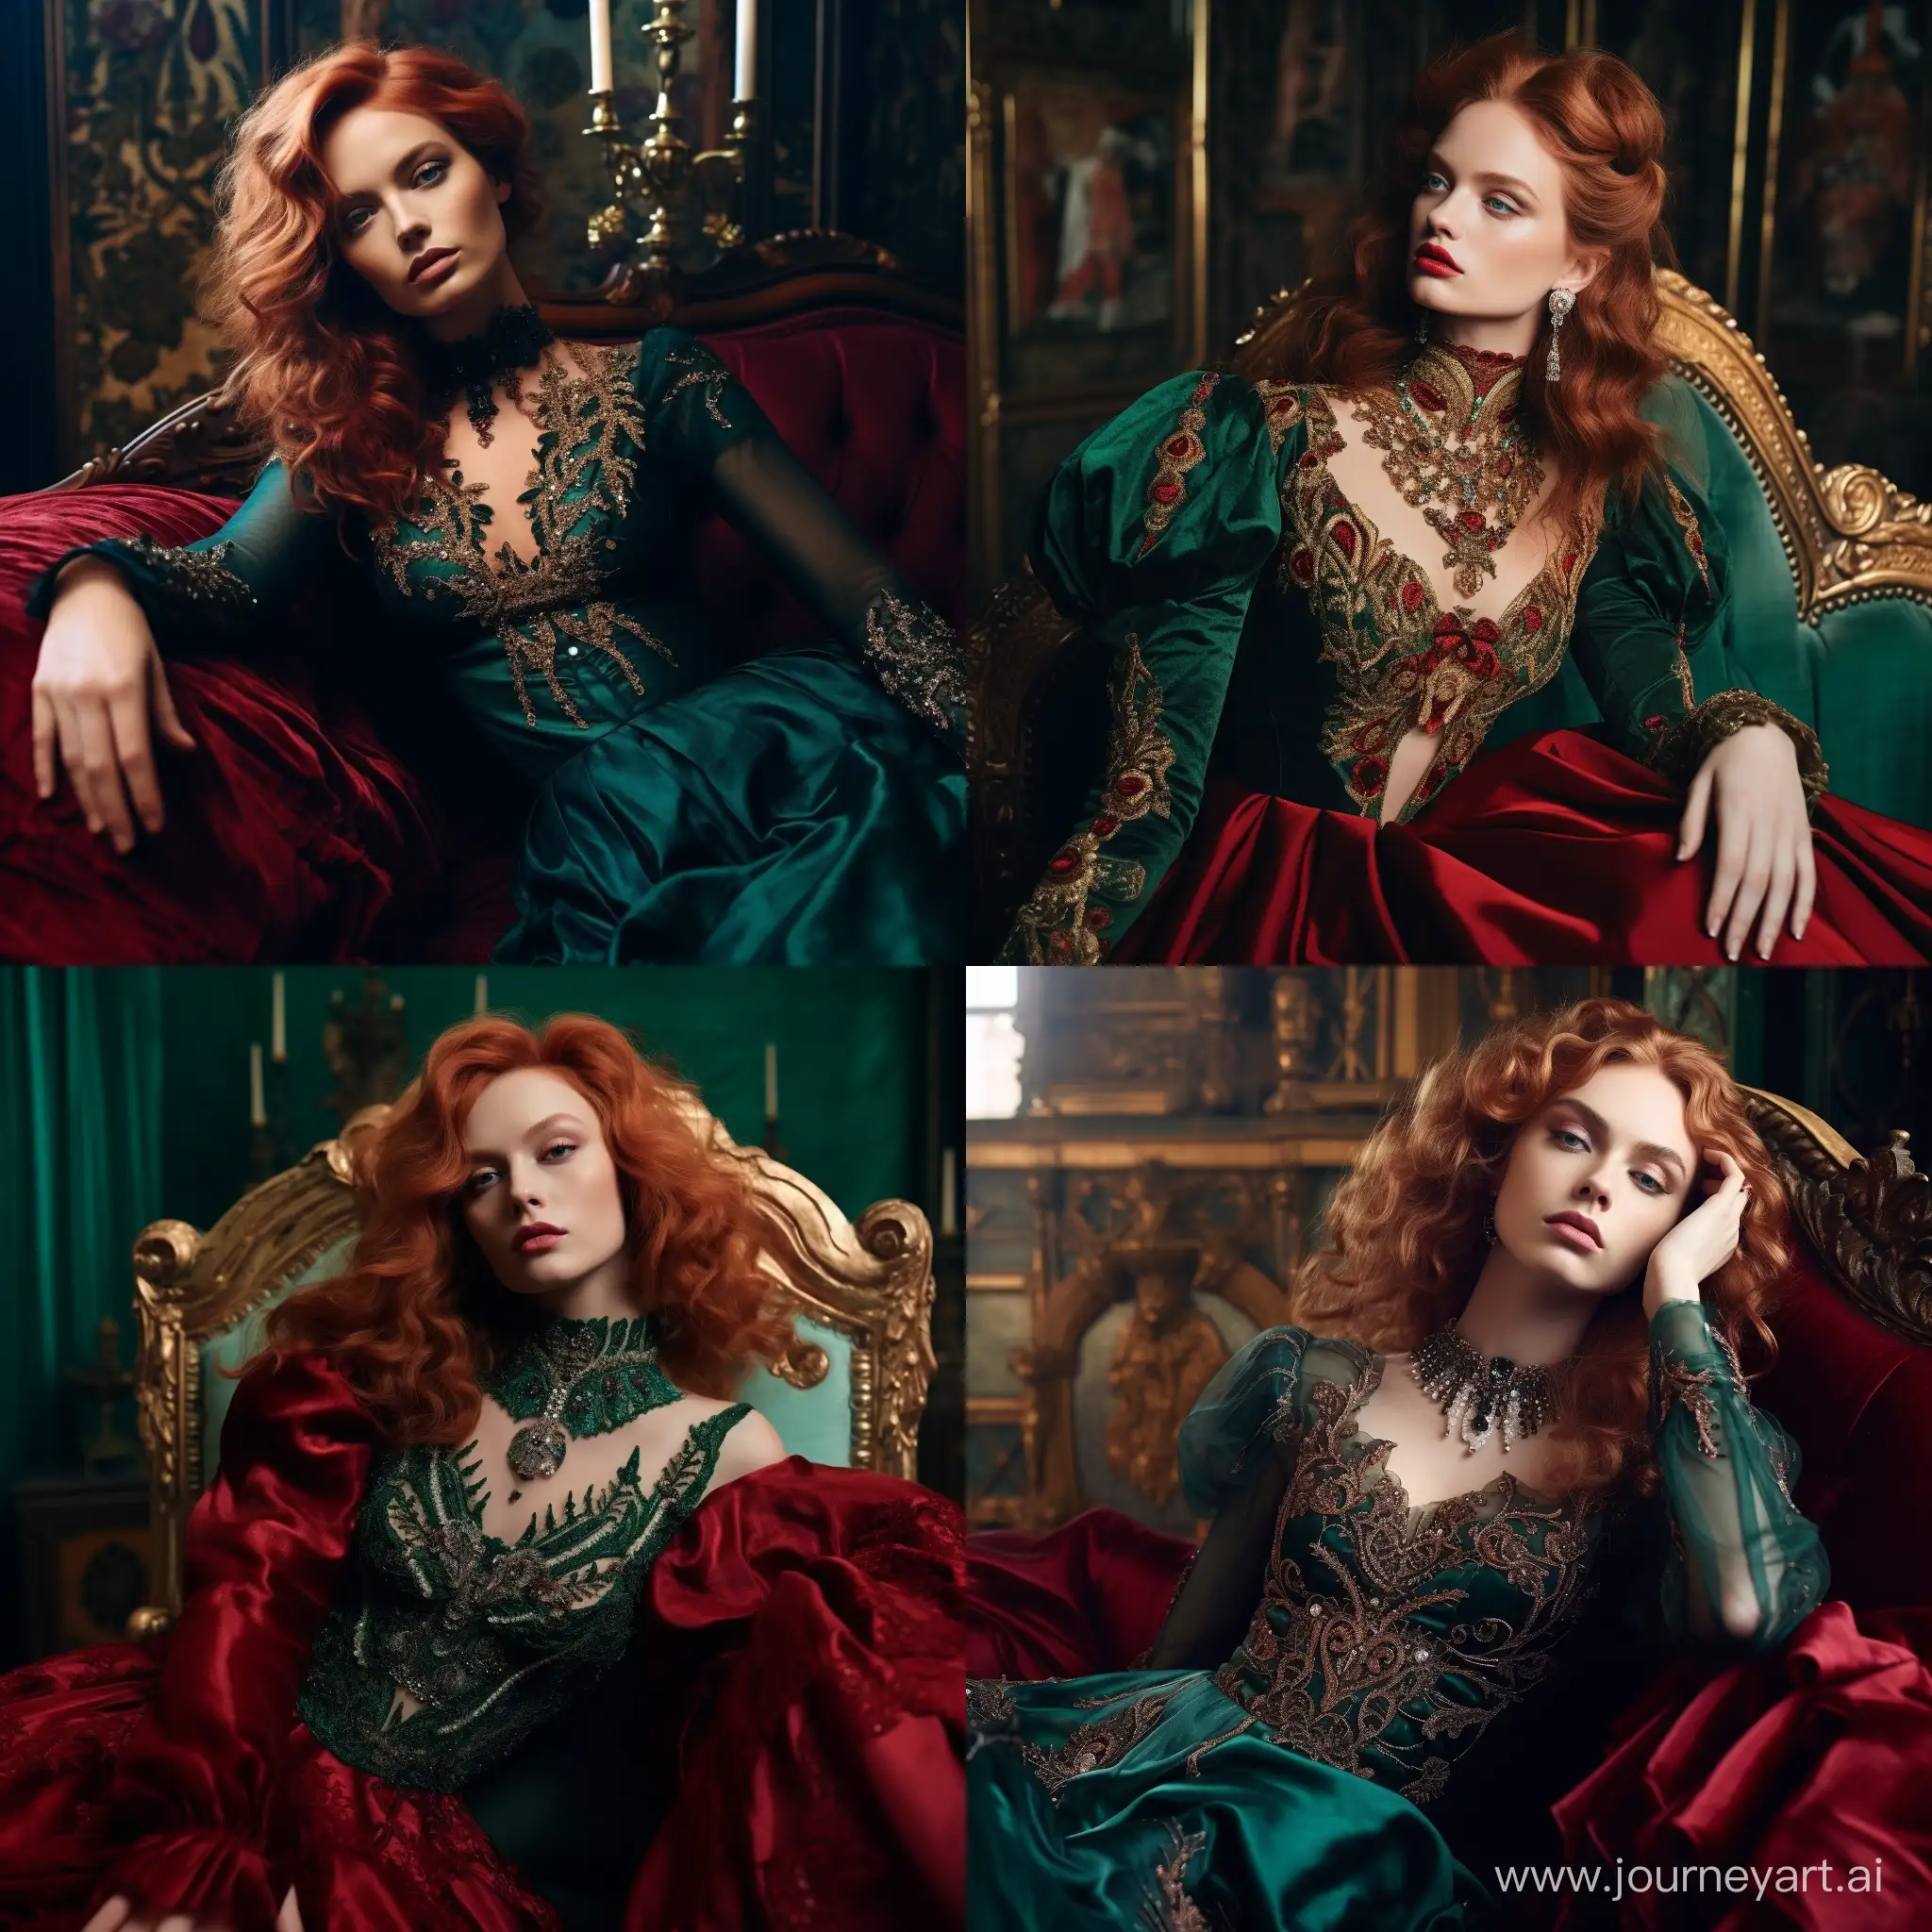 Enchanting-RedHaired-Maiden-in-Luxurious-Velvet-Attire-by-Alessio-Balbi